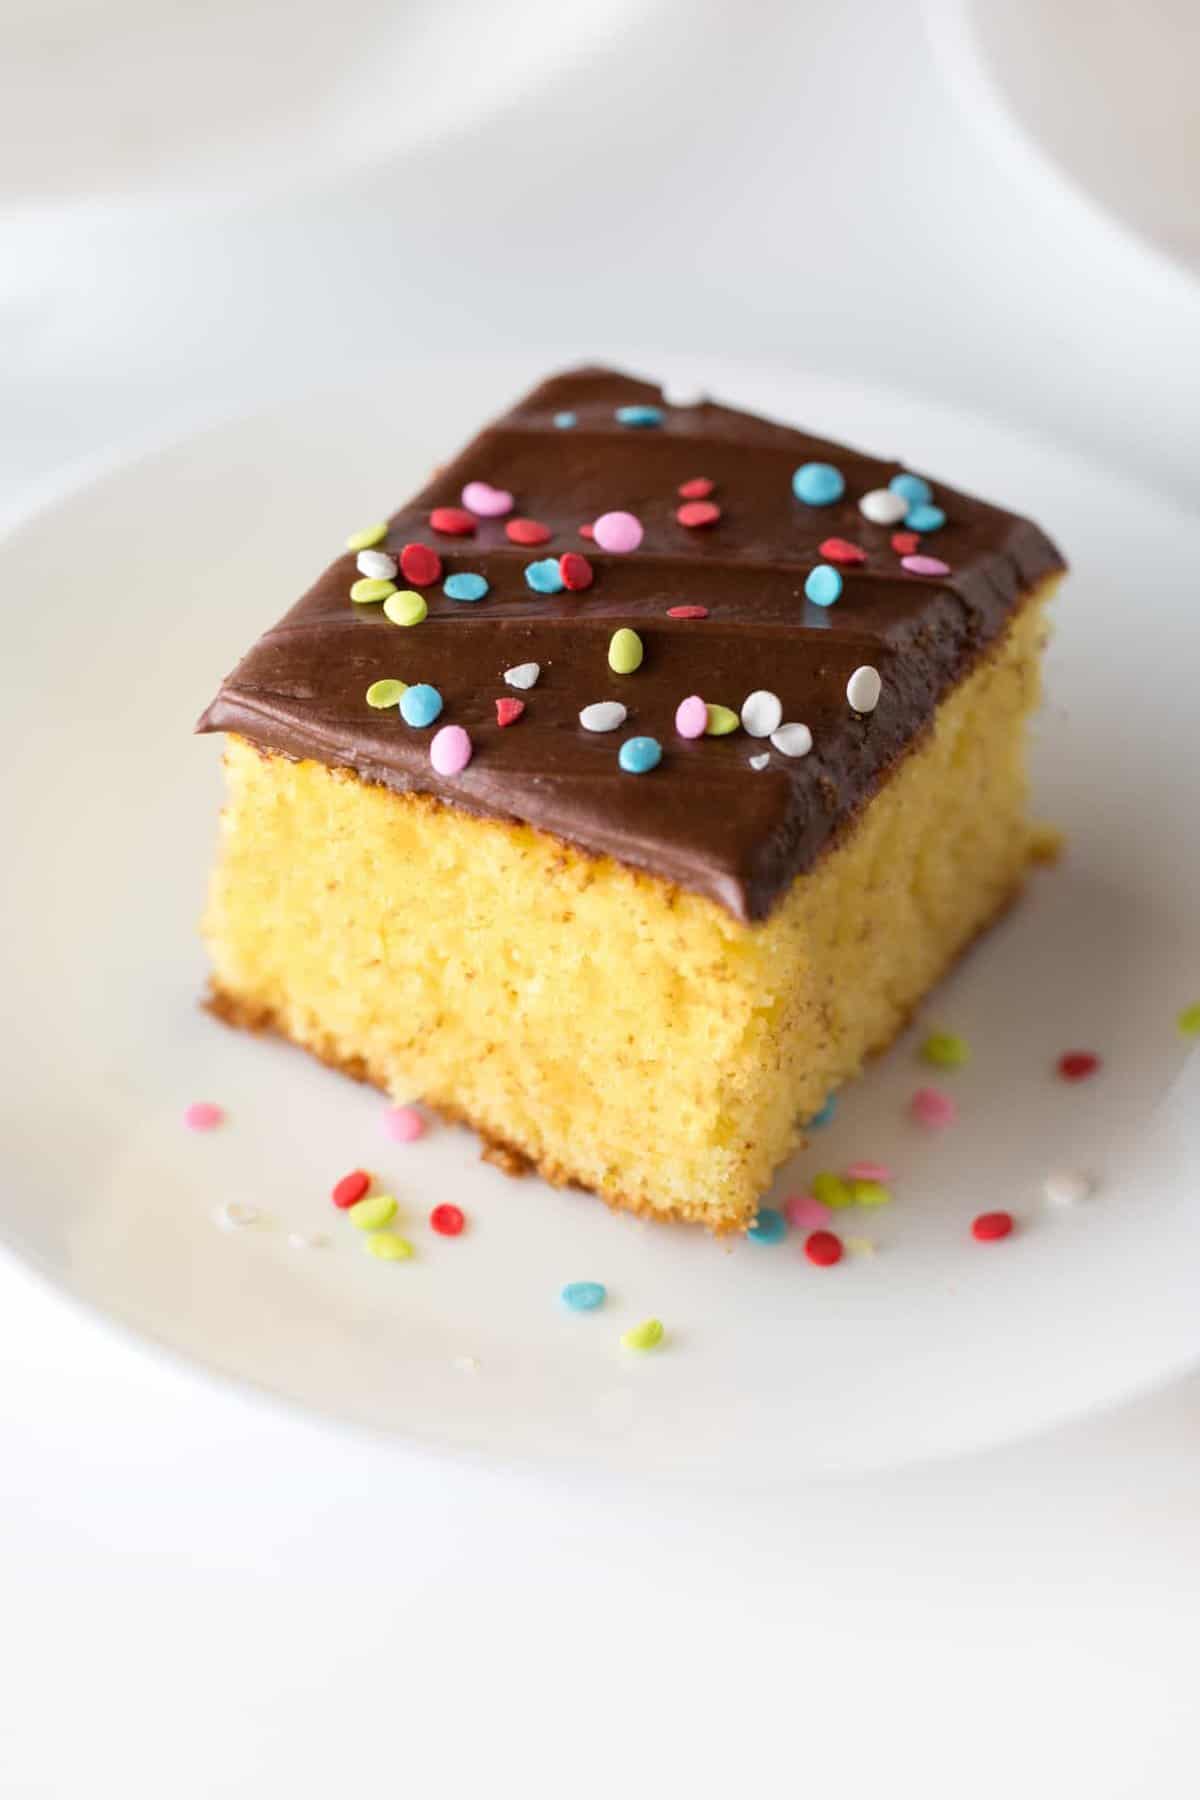 Square slice of yellow cake with easy chocolate frosting with rainbow sprinkle quins on top. On small white plate.